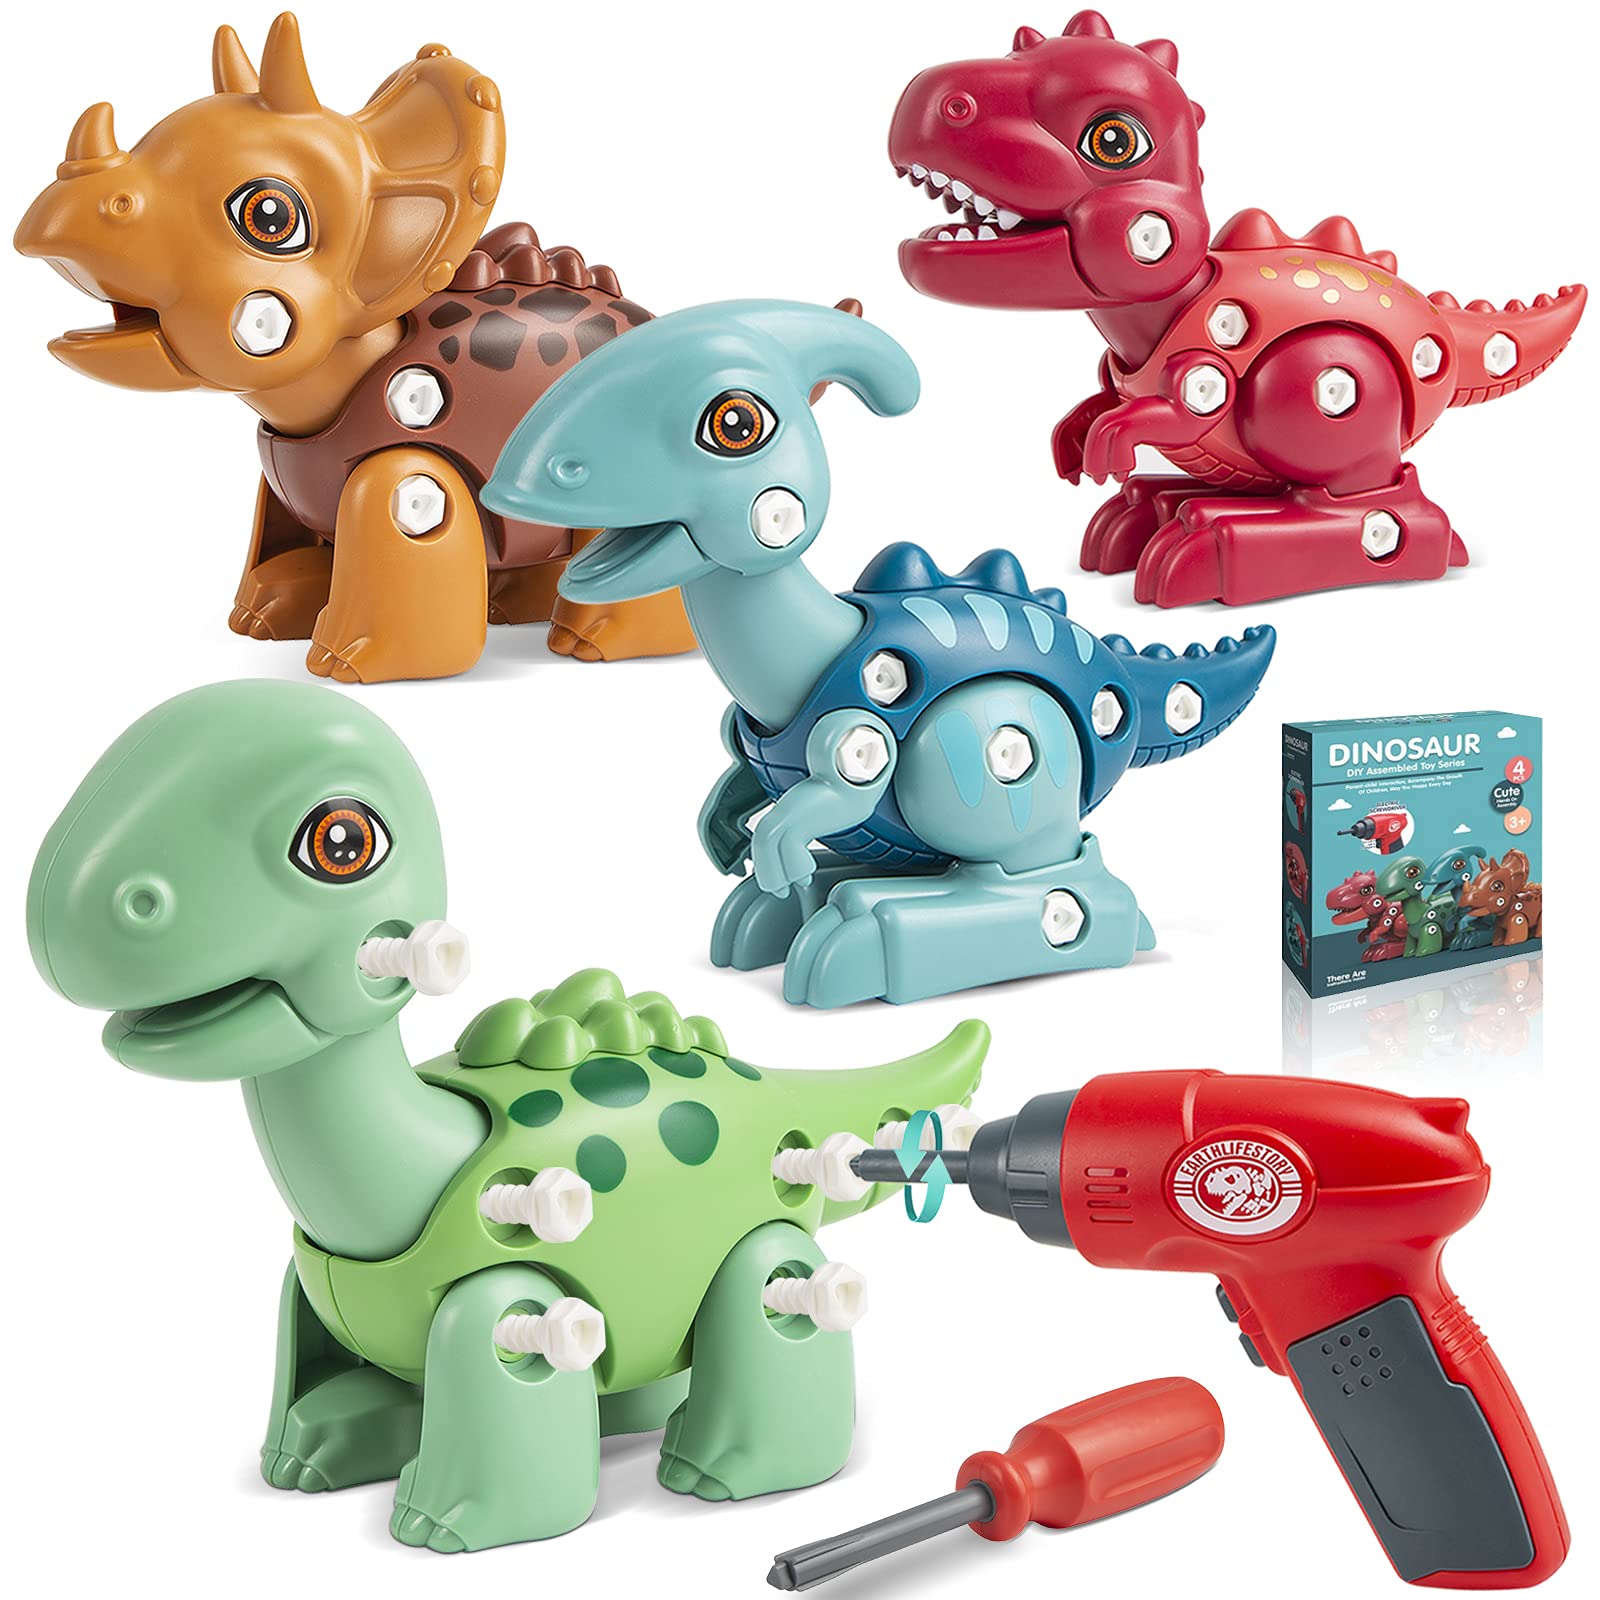 Piestol Dinosaur Toys for 3-5 5-7 Year Old Boys，Take Apart Dinosaur Toys for Kids with Electric Drill，Incl Tyrannosaurus Rex Triceratops Easter Basket Stuffers Gift（4 in 1）